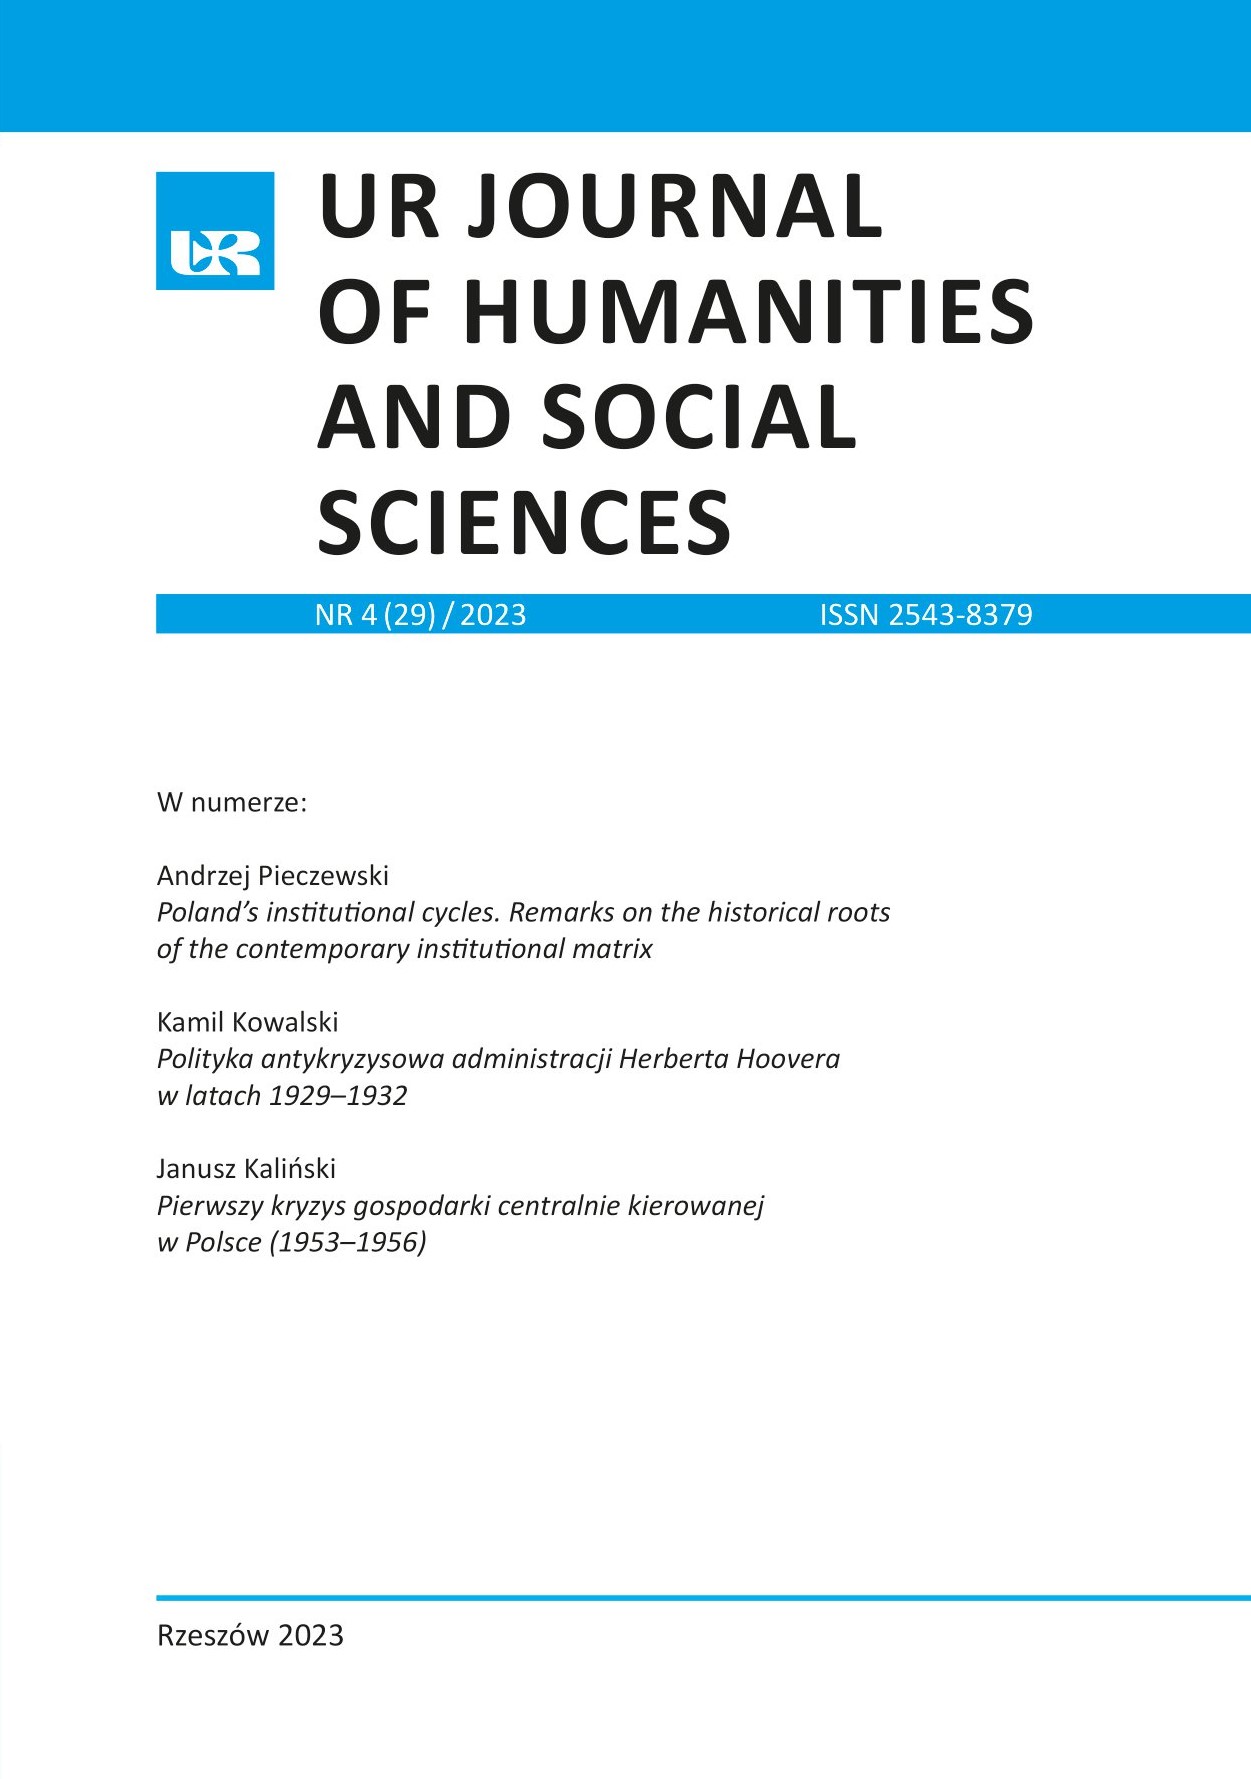 UR Journal of Humanities and Social Sciences